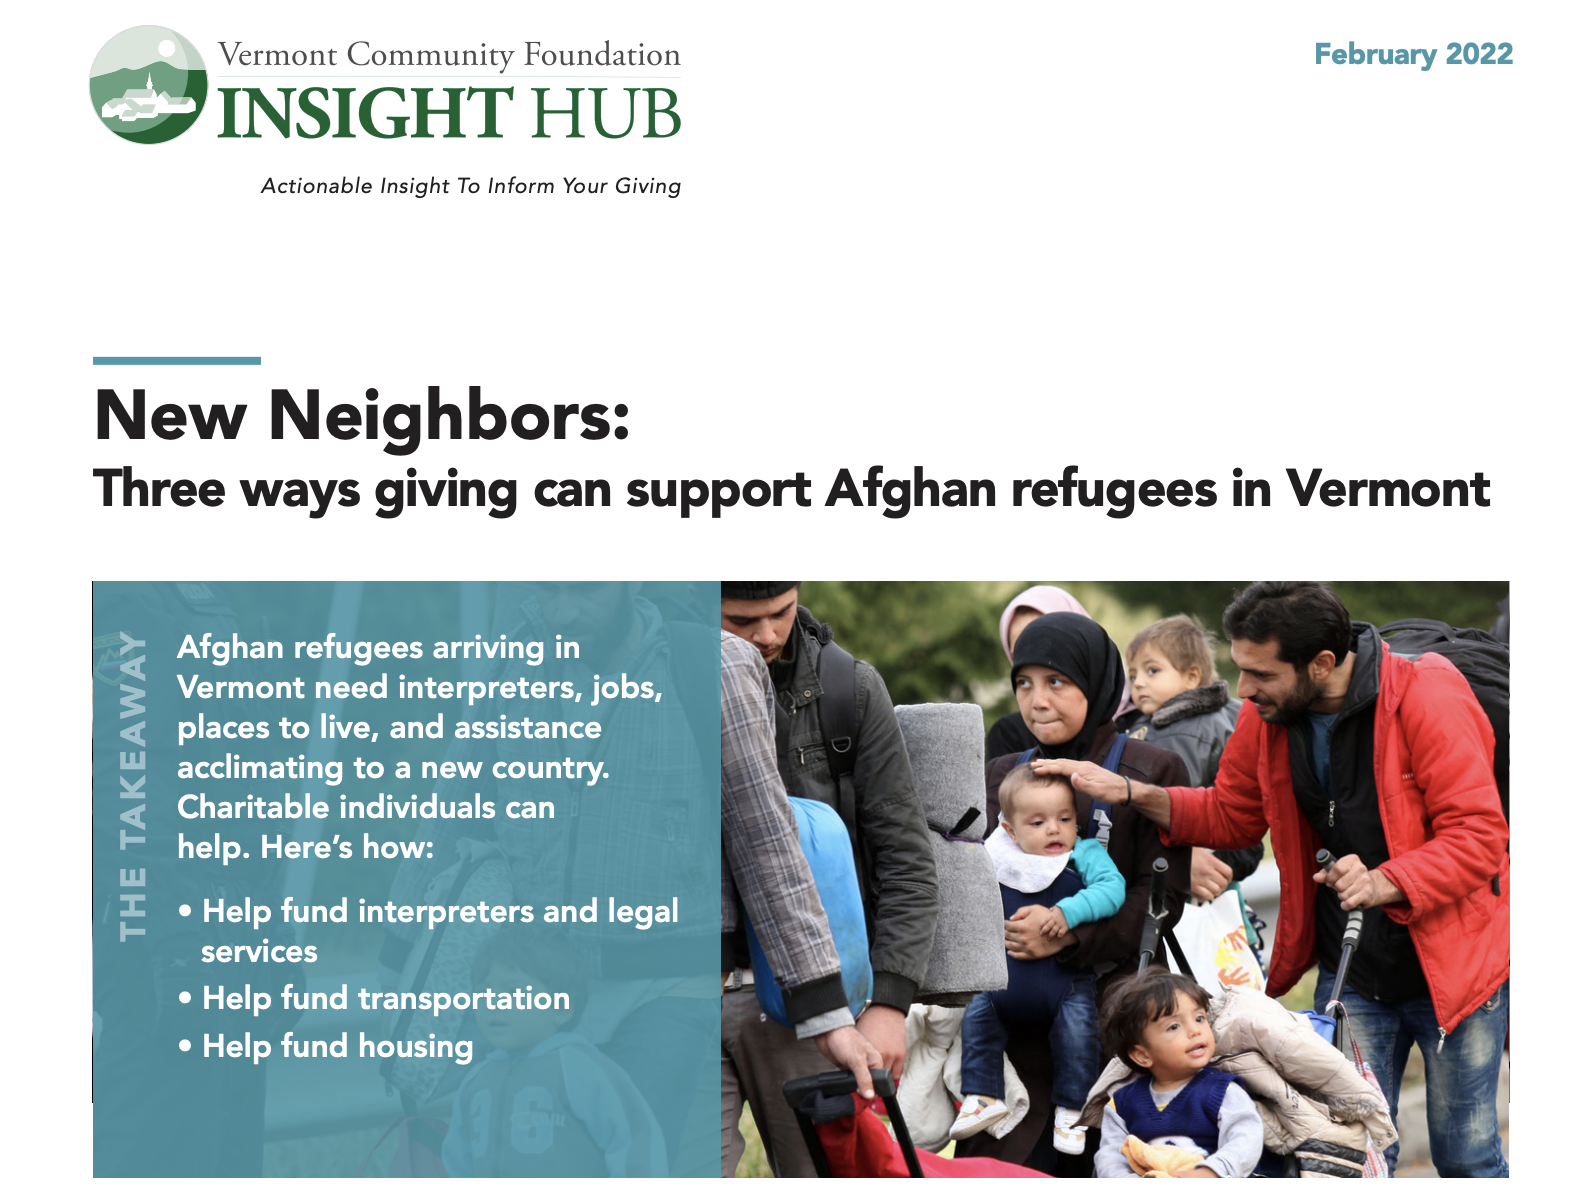 Vermont Community Foundation Urges Support For Afghan Refugees